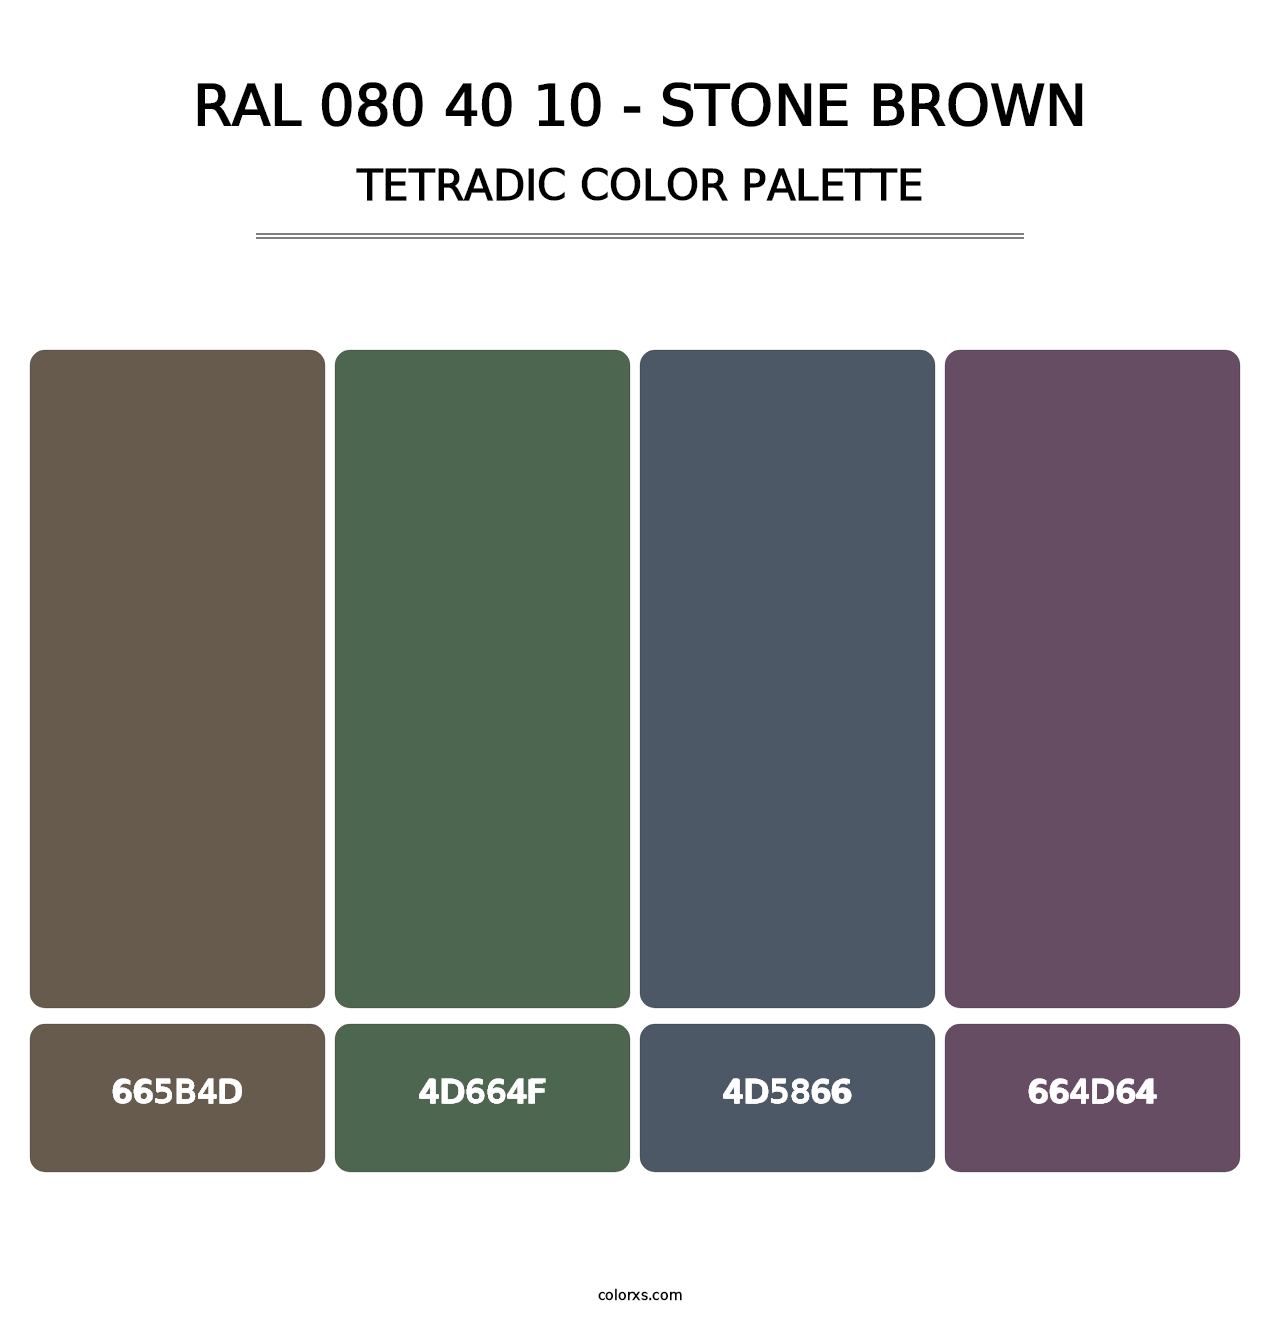 RAL 080 40 10 - Stone Brown - Tetradic Color Palette